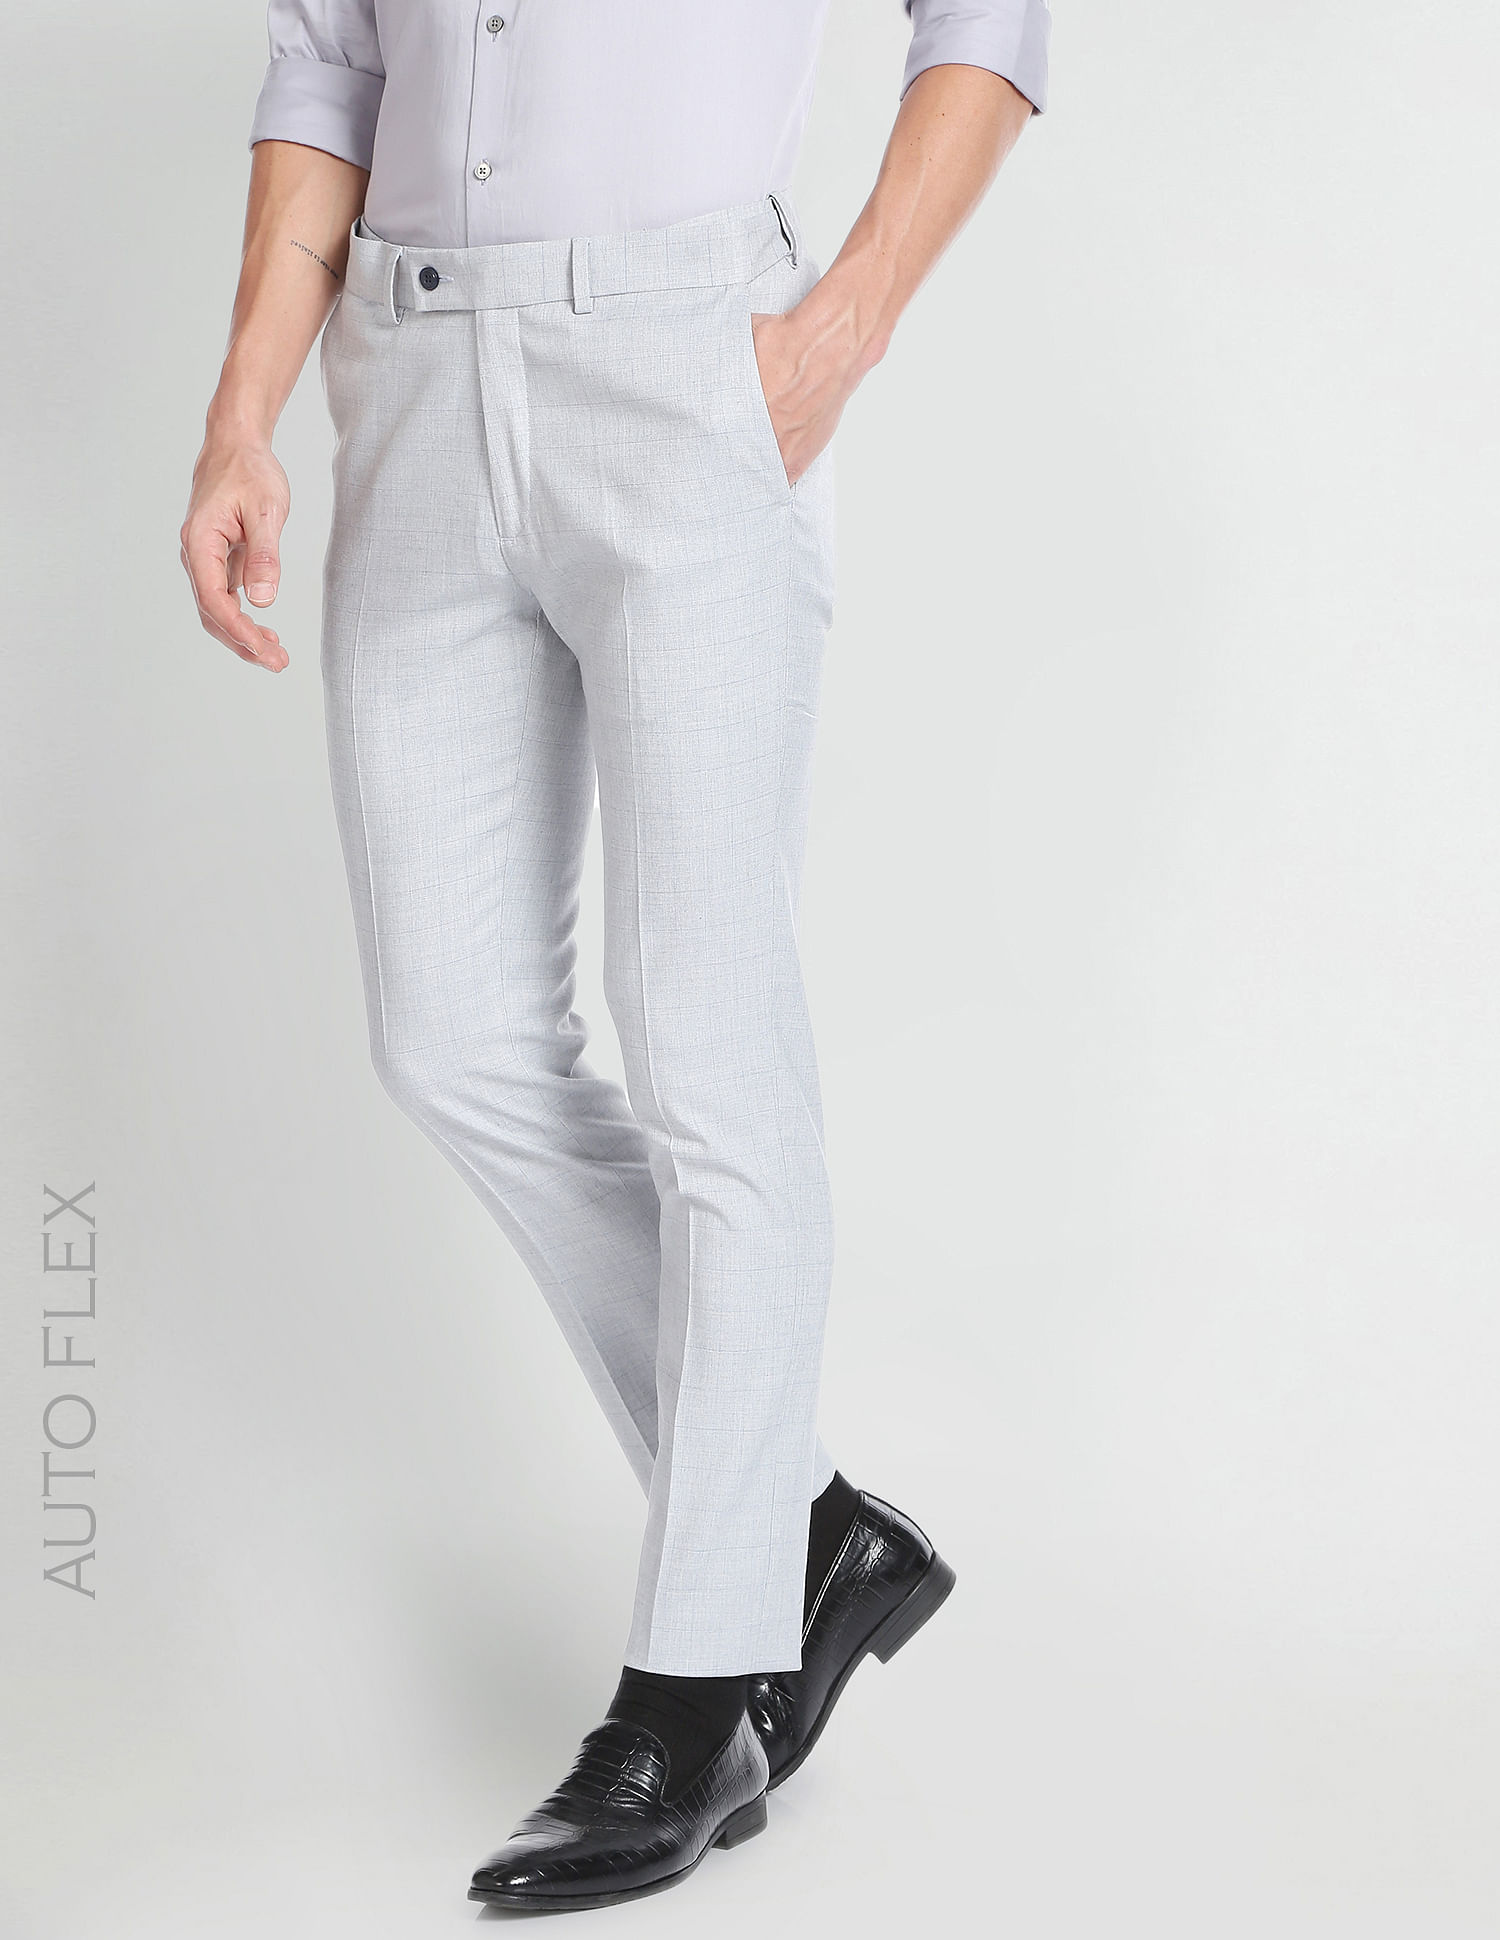 Check Trousers available in Nigeria  Buy Online  Best Price in Nigeria   Jumia NG